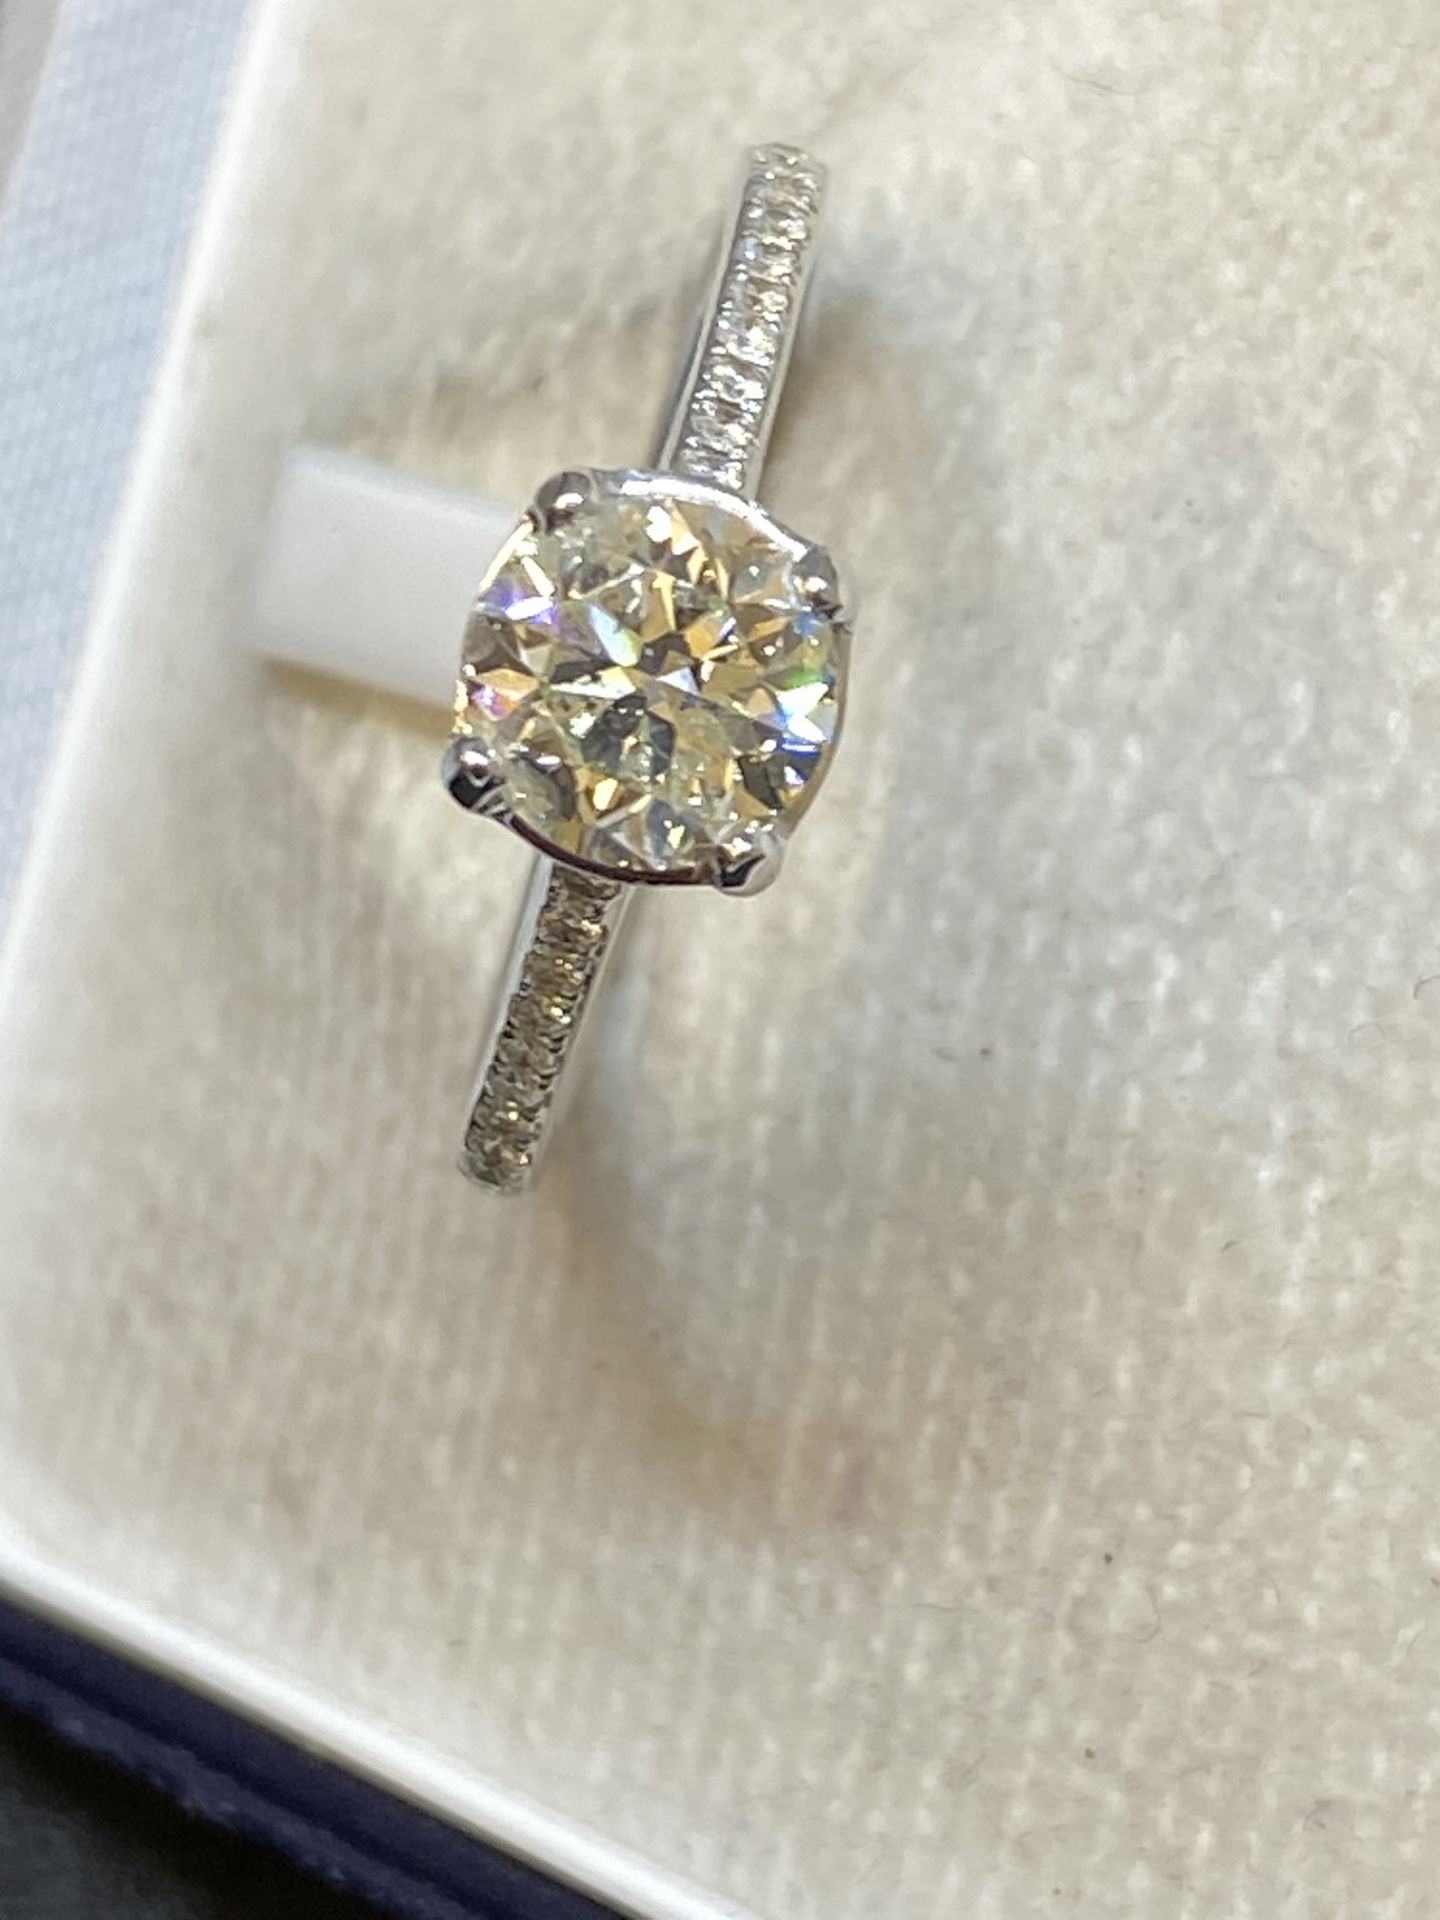 18ct GOLD 1.07ct H/SI1 DIAMOND SOLITAIRE RING - Image 4 of 9